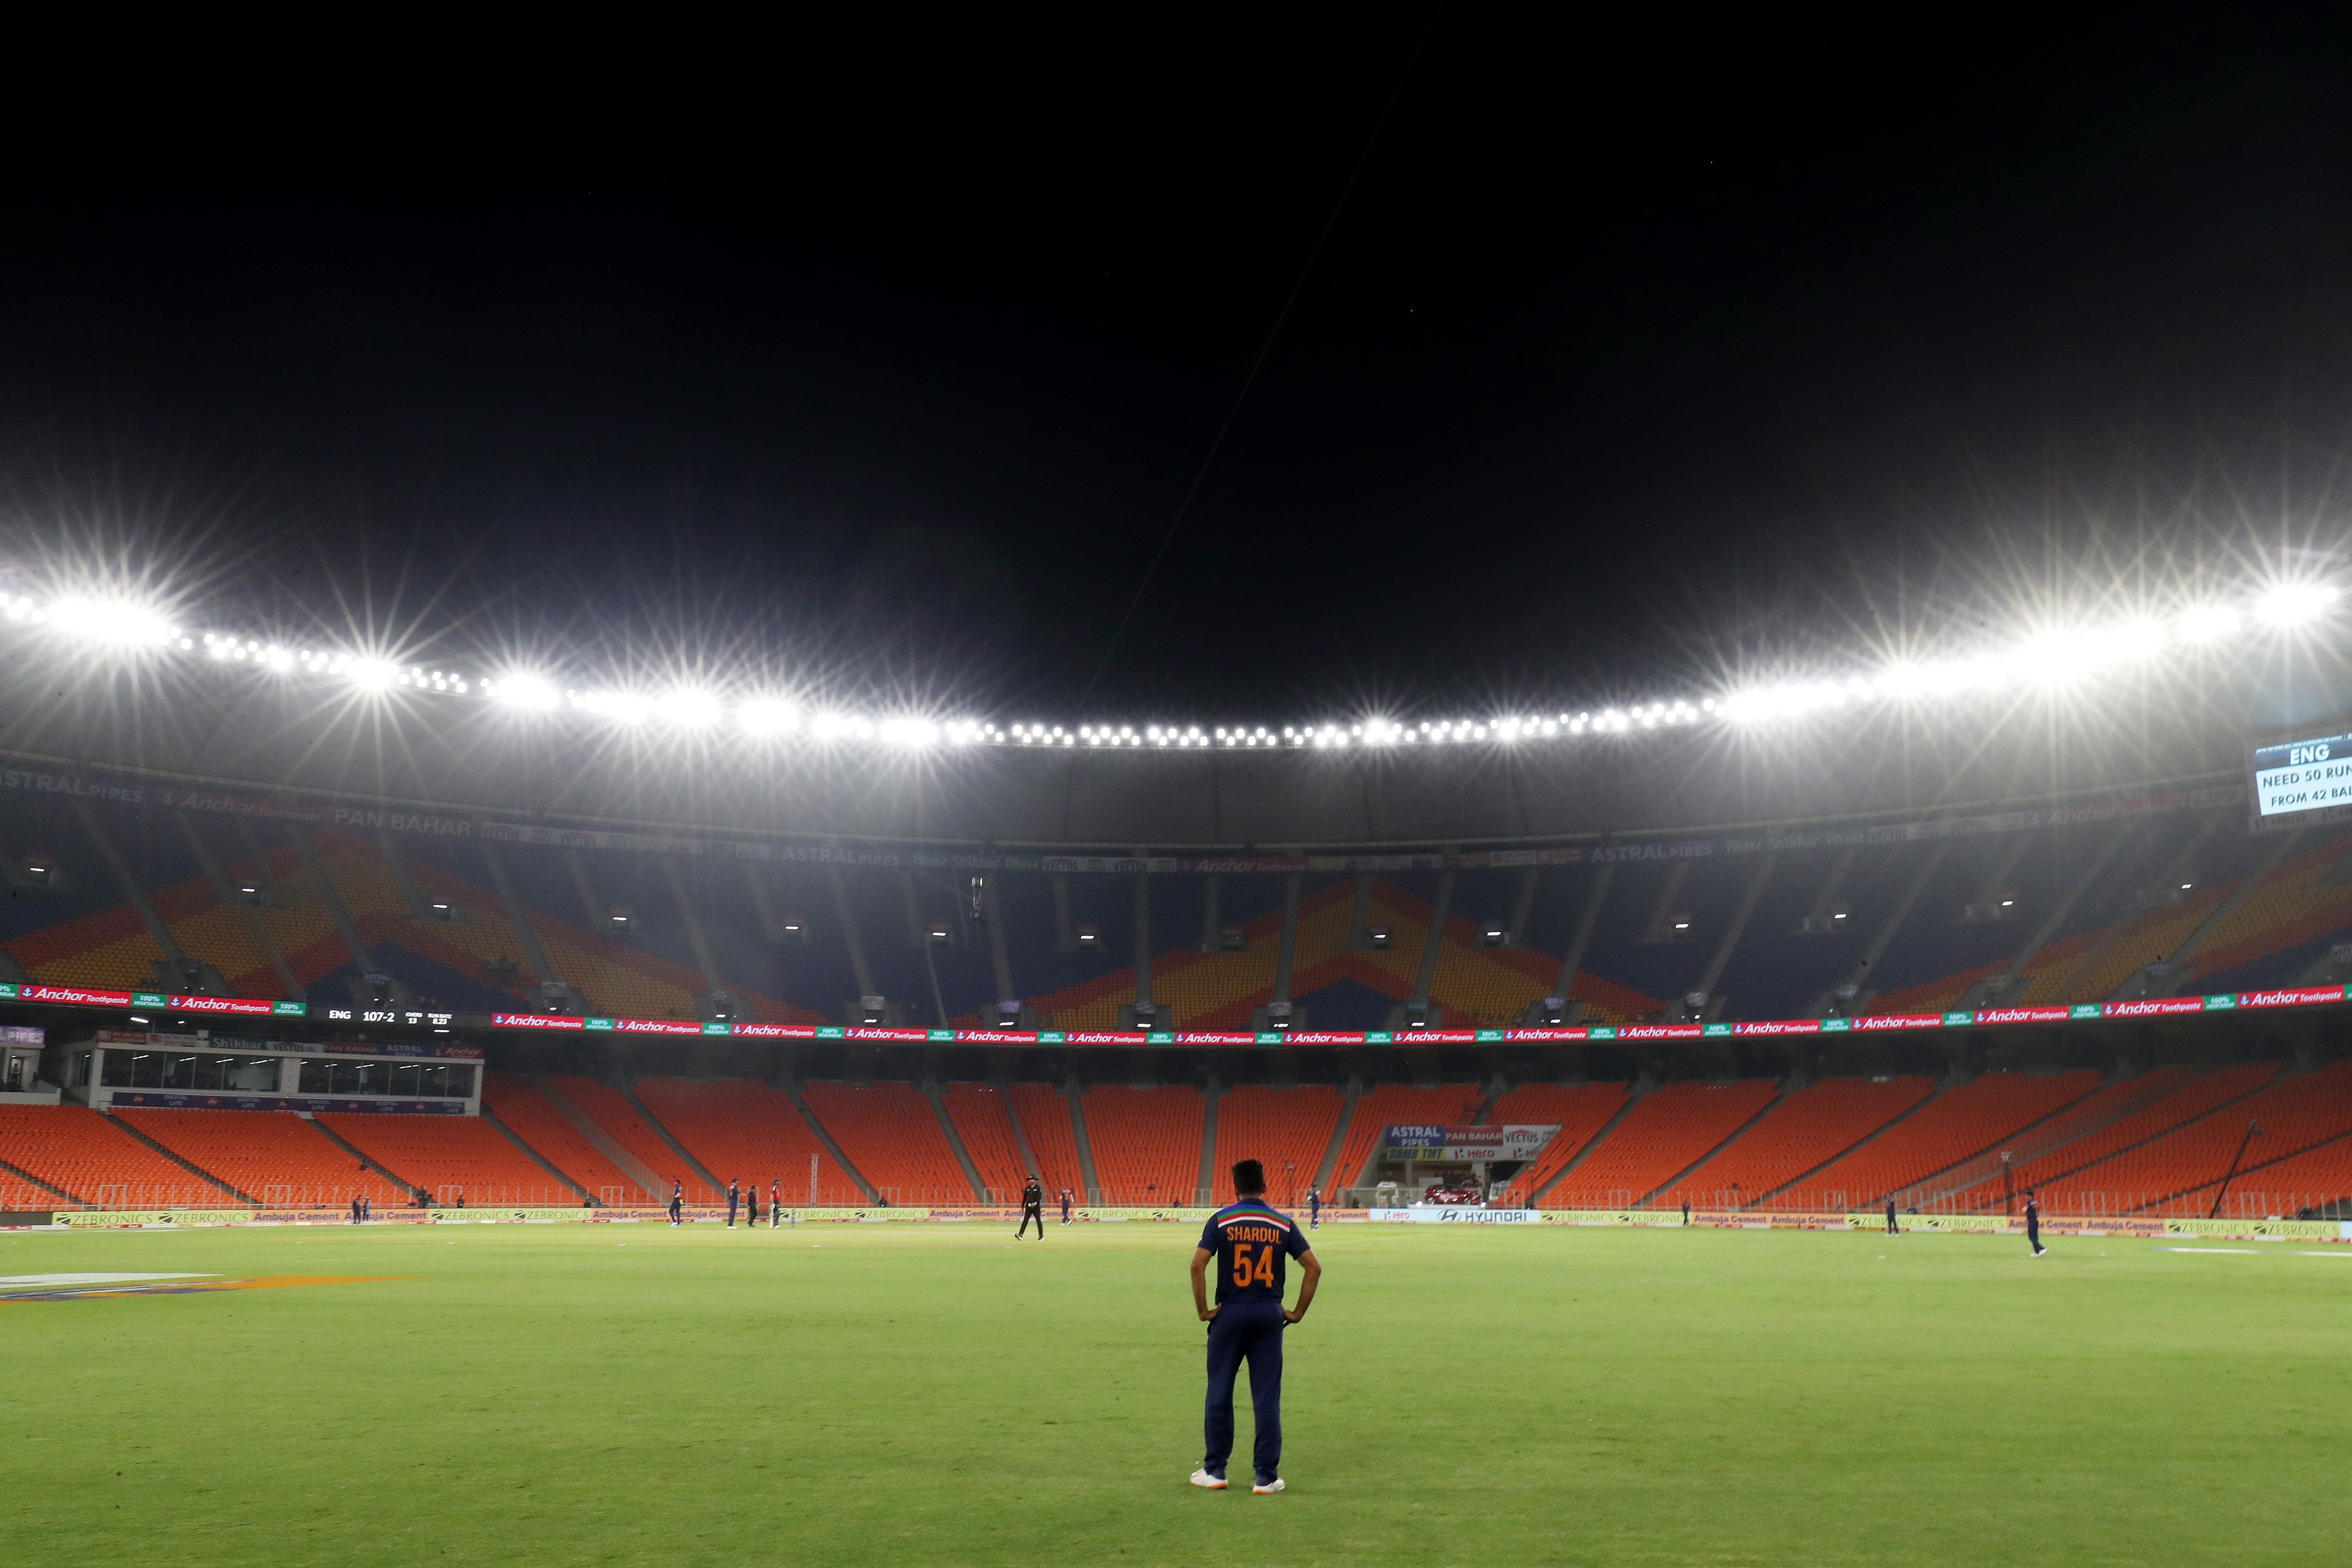 The postponed match was due to take place at the Narendra Modi Stadium in Ahmedabad